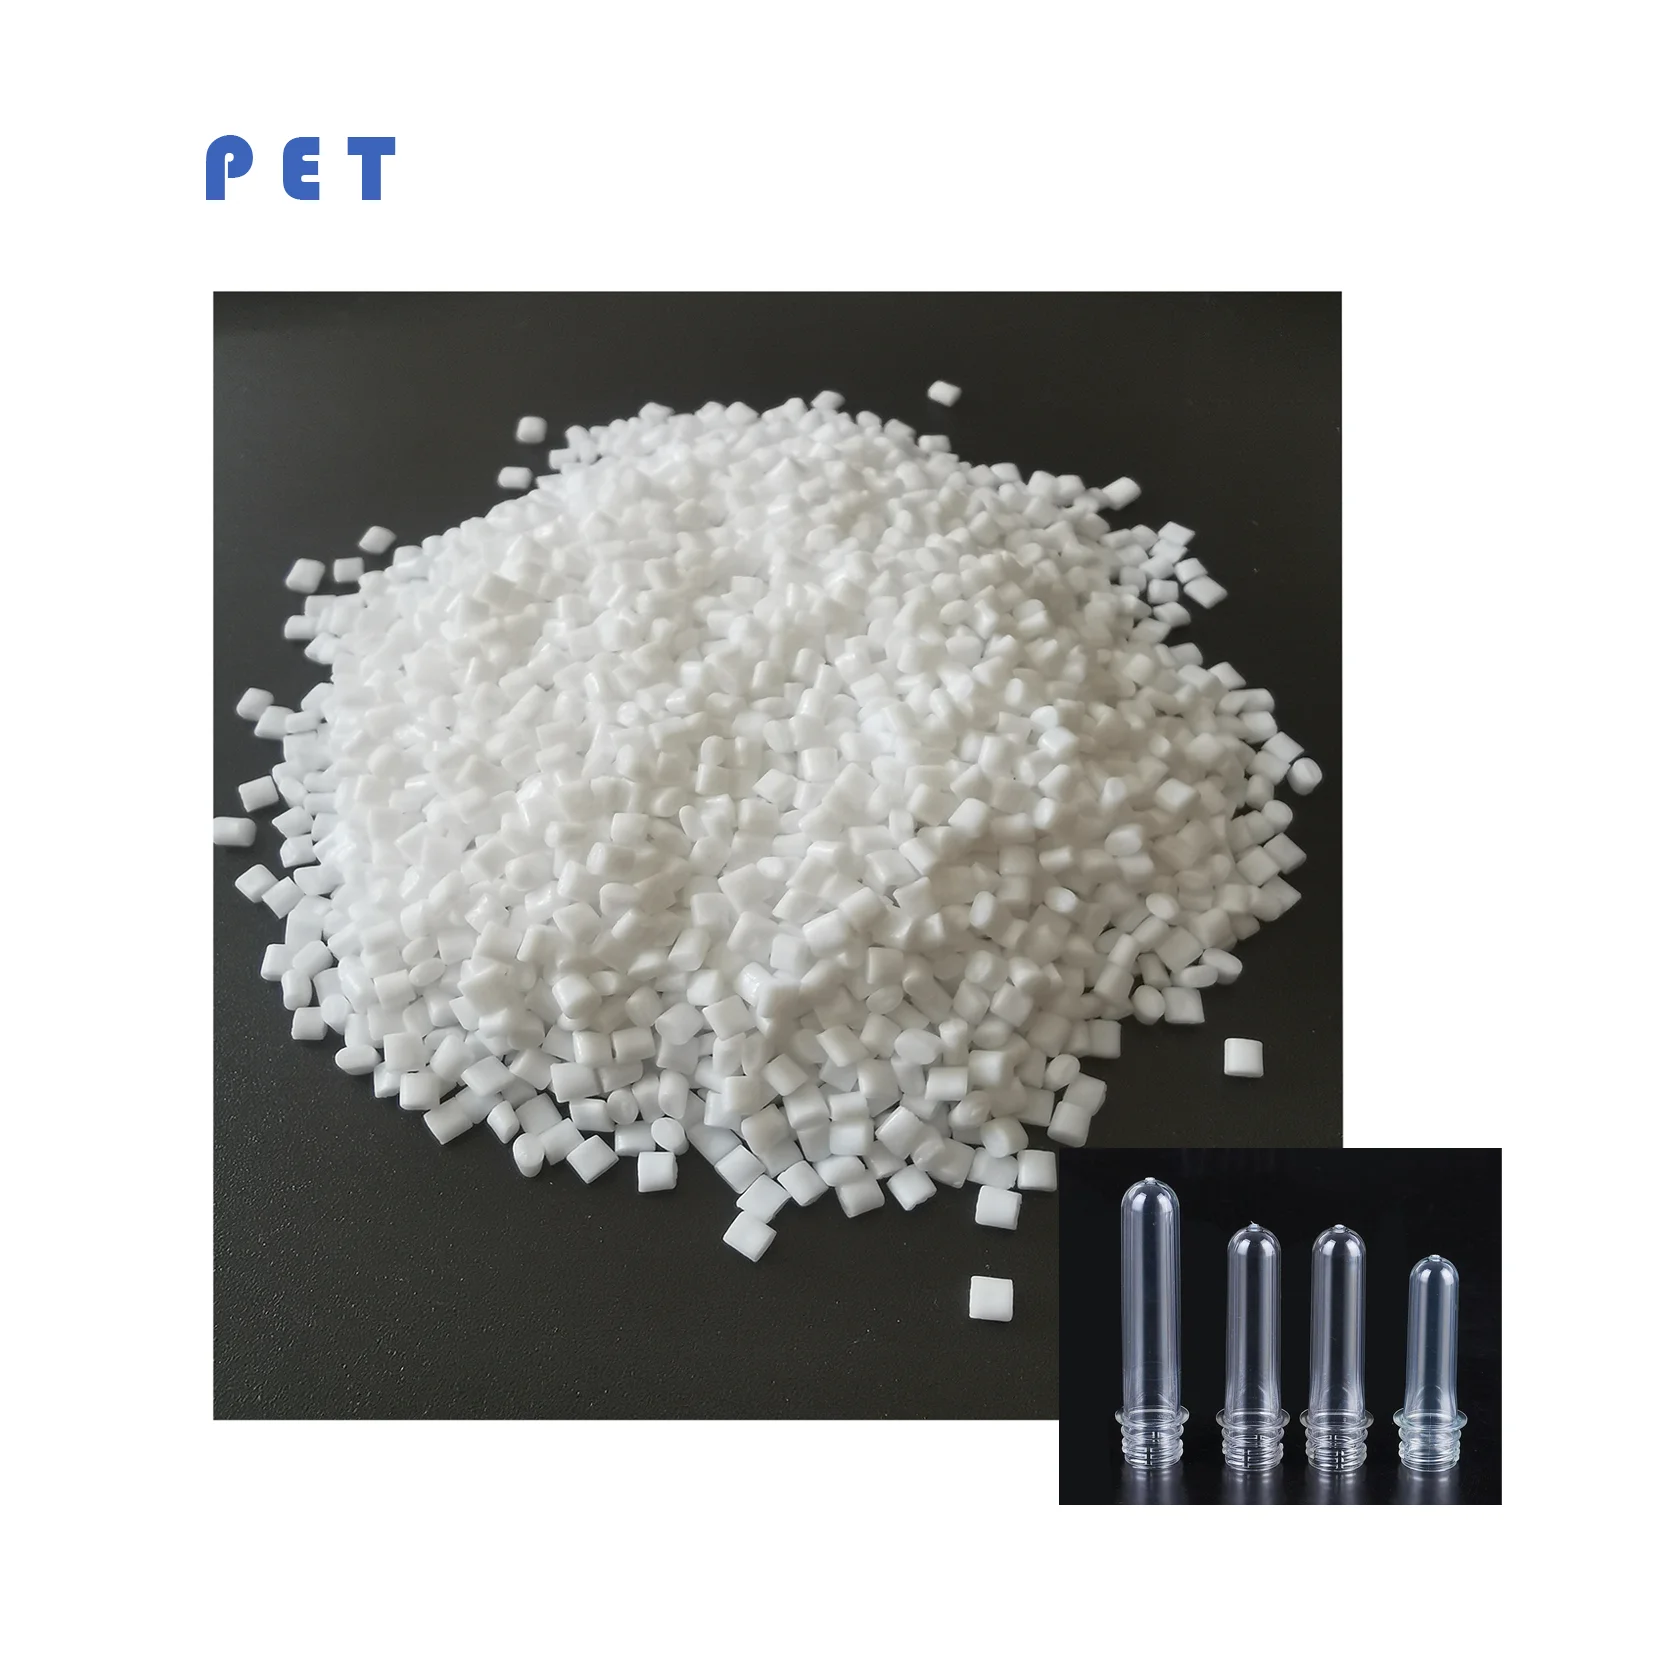 
Top quality virgin PET resin bottle grade from biggest Chinese manufacturers 